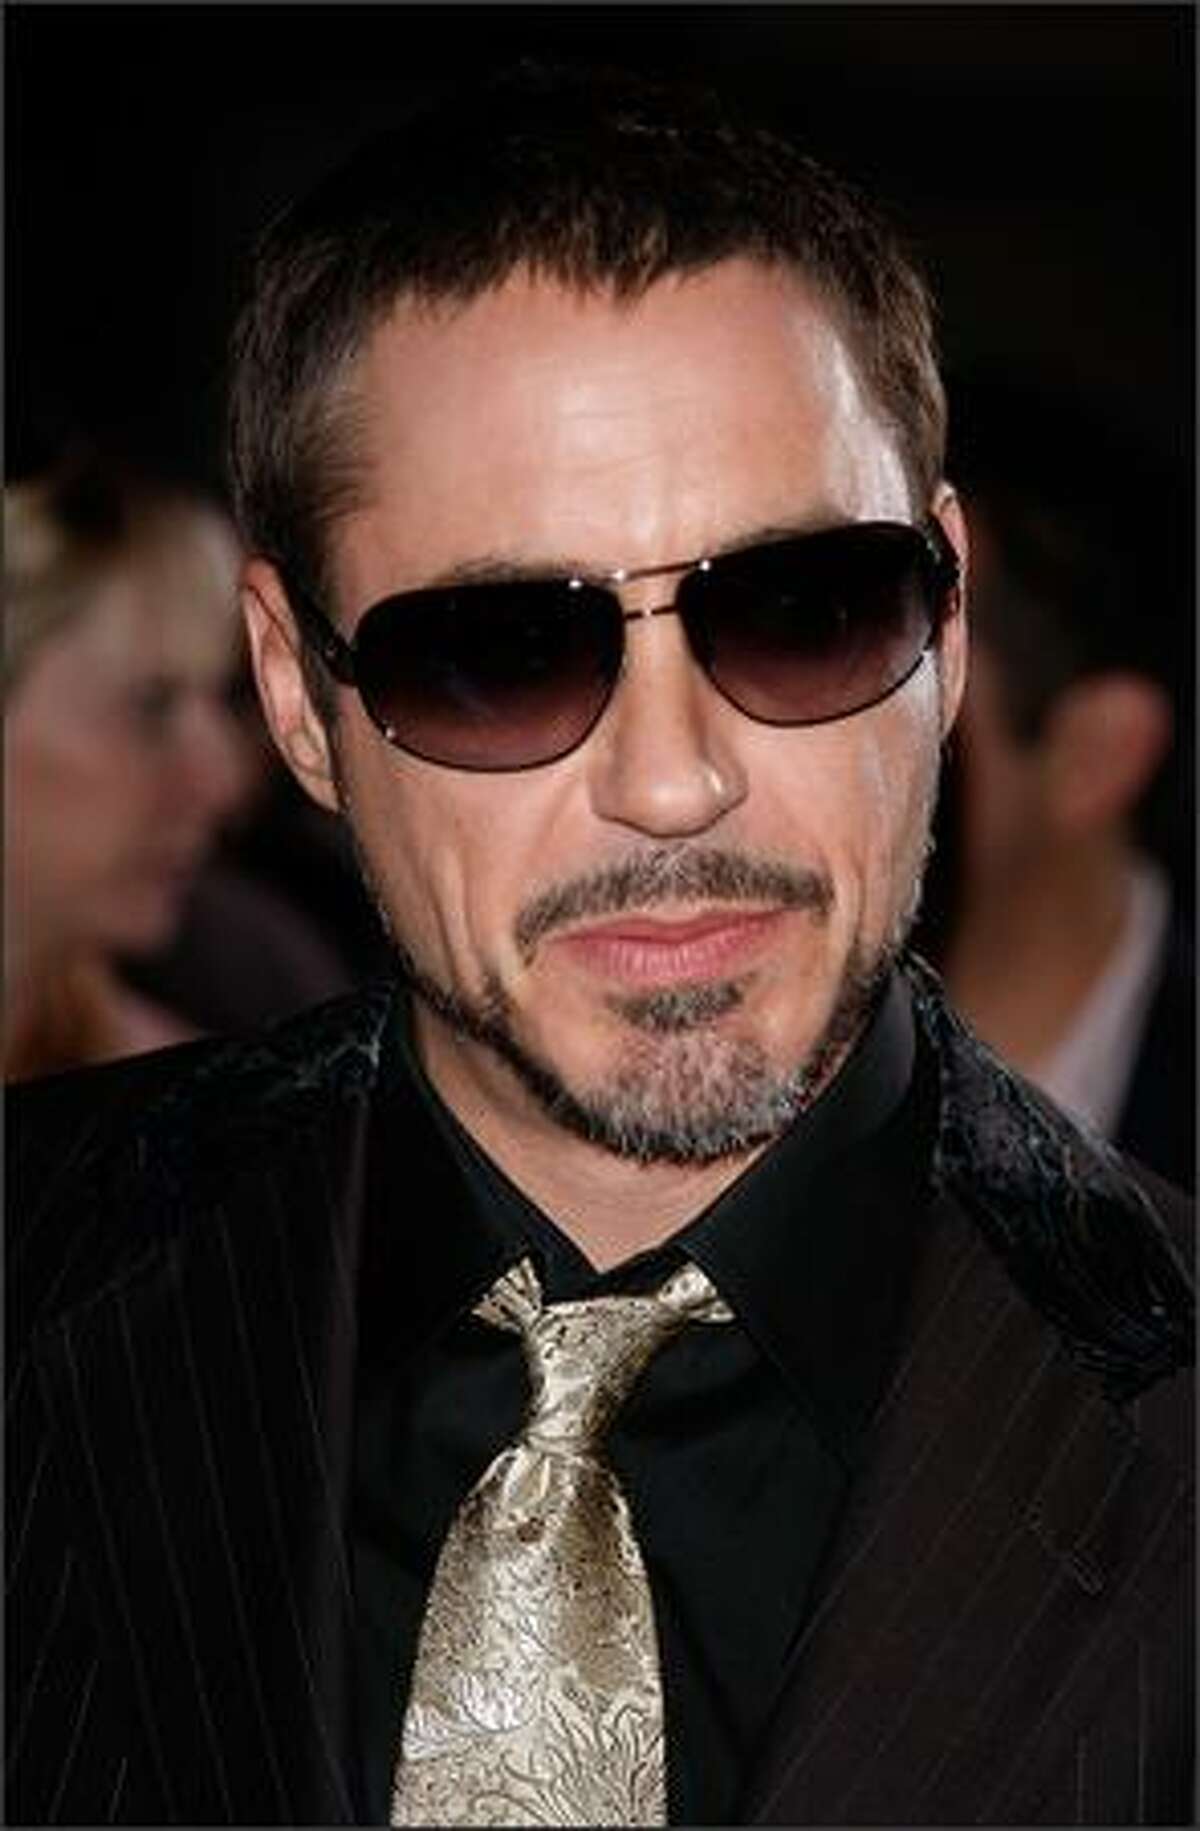 Actor Robert Downey Jr. arrives at the premiere at Grauman's Chinese Theatre.